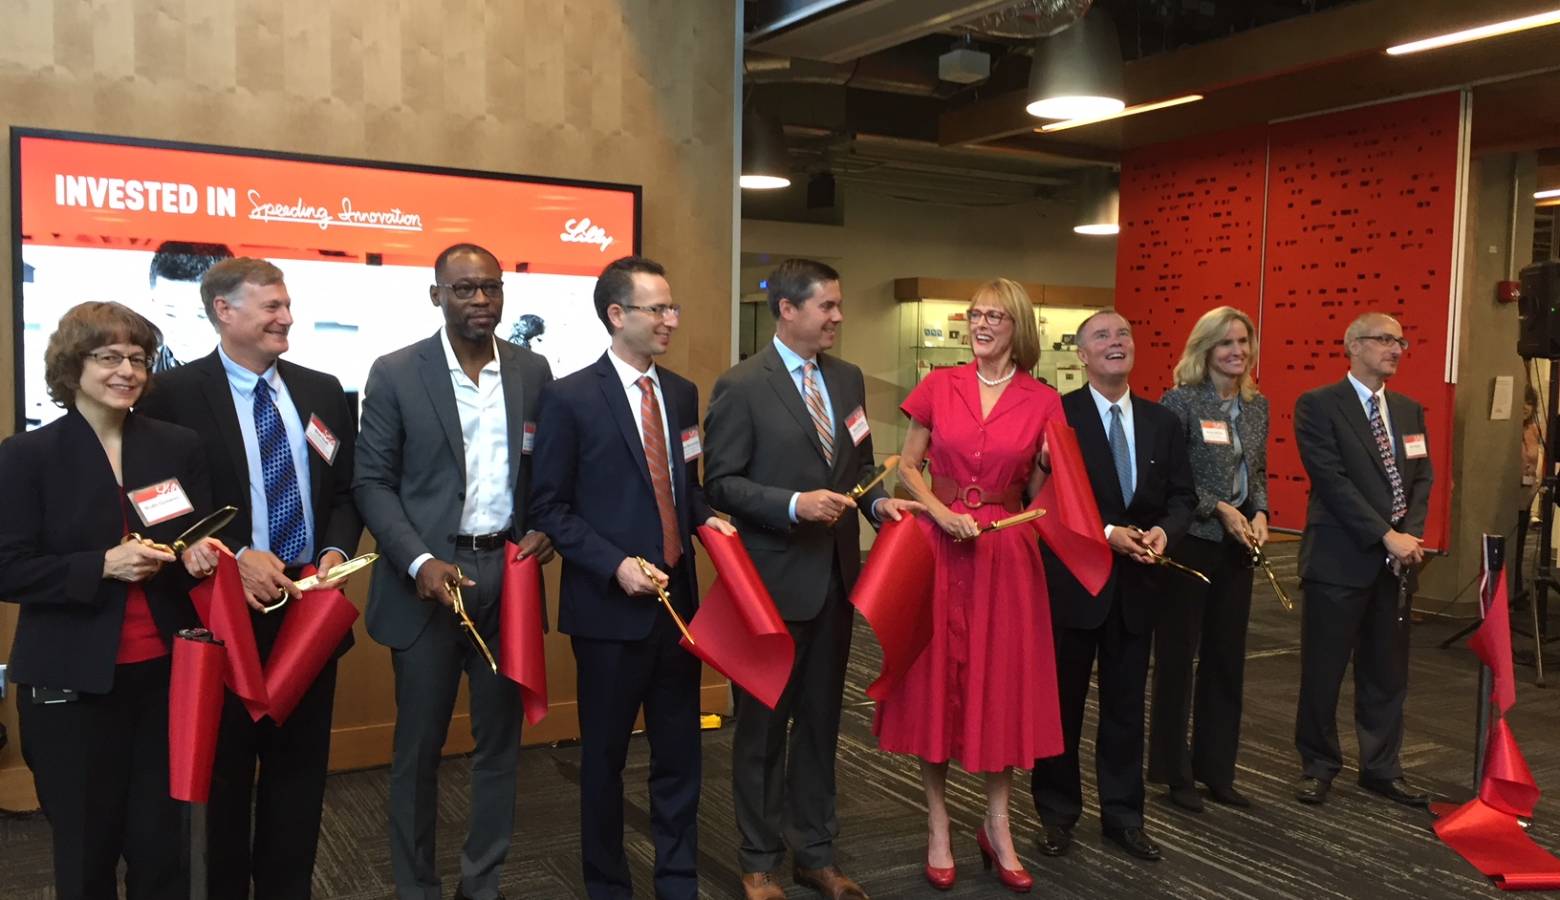 Eli Lilly leaders join state and city officials for ribbon cutting at "Building 302." (Jill Sheridan/IPB News)